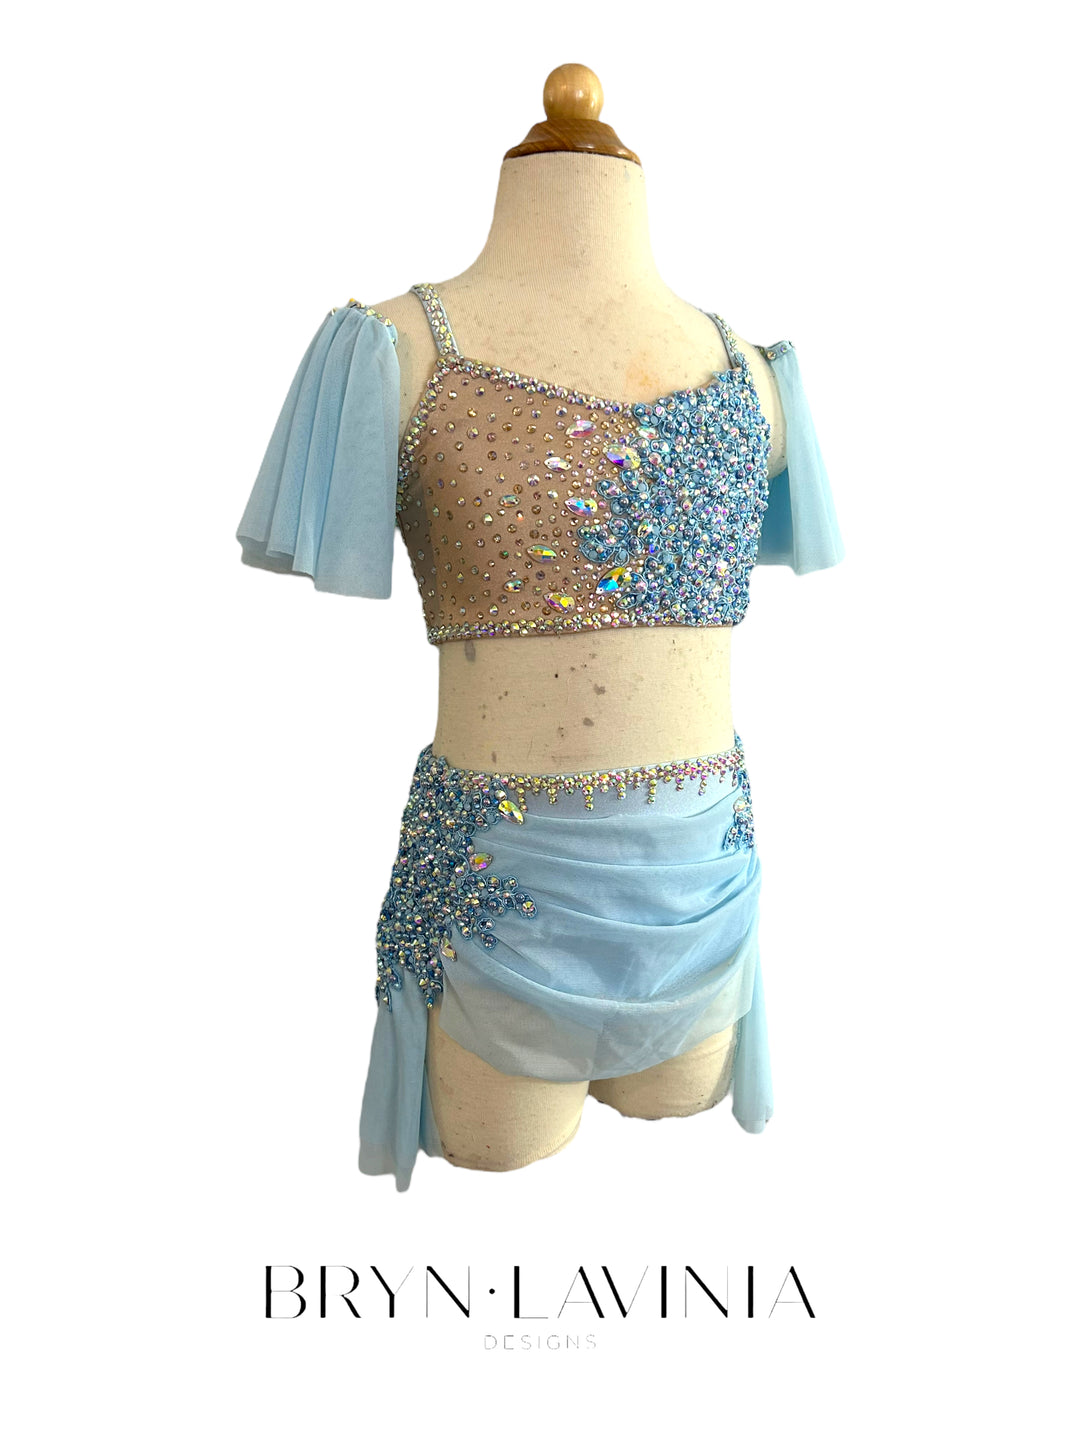 NEW CL light blue/nude ready to ship costume